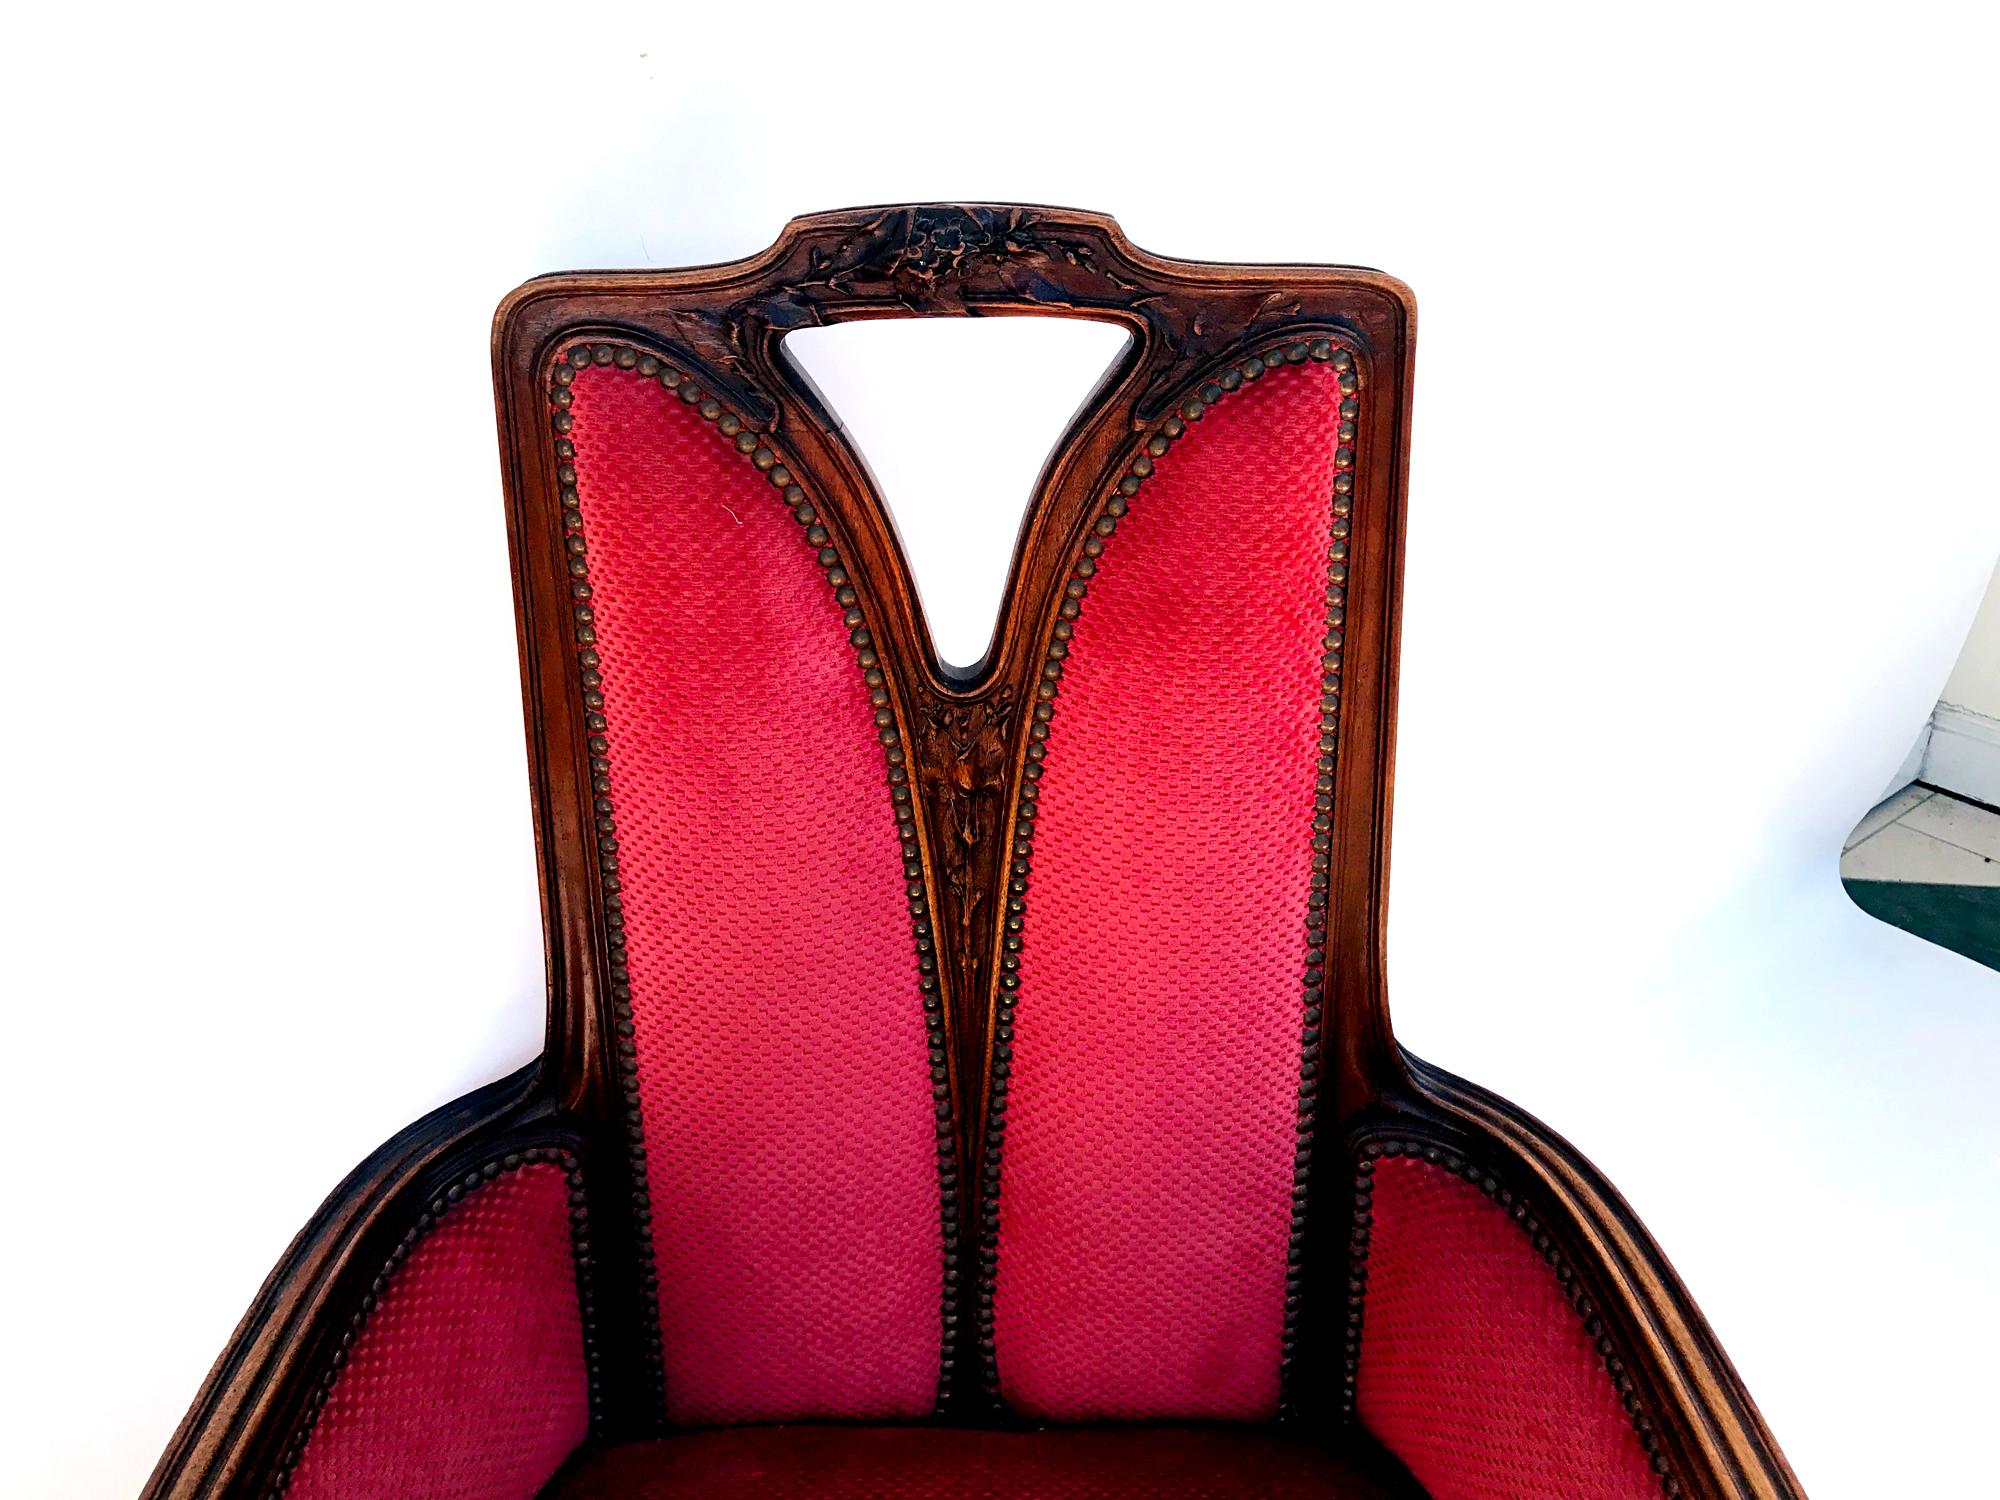 Louis Majorelle - Art Nouveau Armchair, Ecole de Nancy, circa 1900. Made of walnut.

Very finely designed frame with floral relief carvings. Fine and very time typical lines, a seat furniture in highest quality.

Louis Majorelle (1859-1926) is